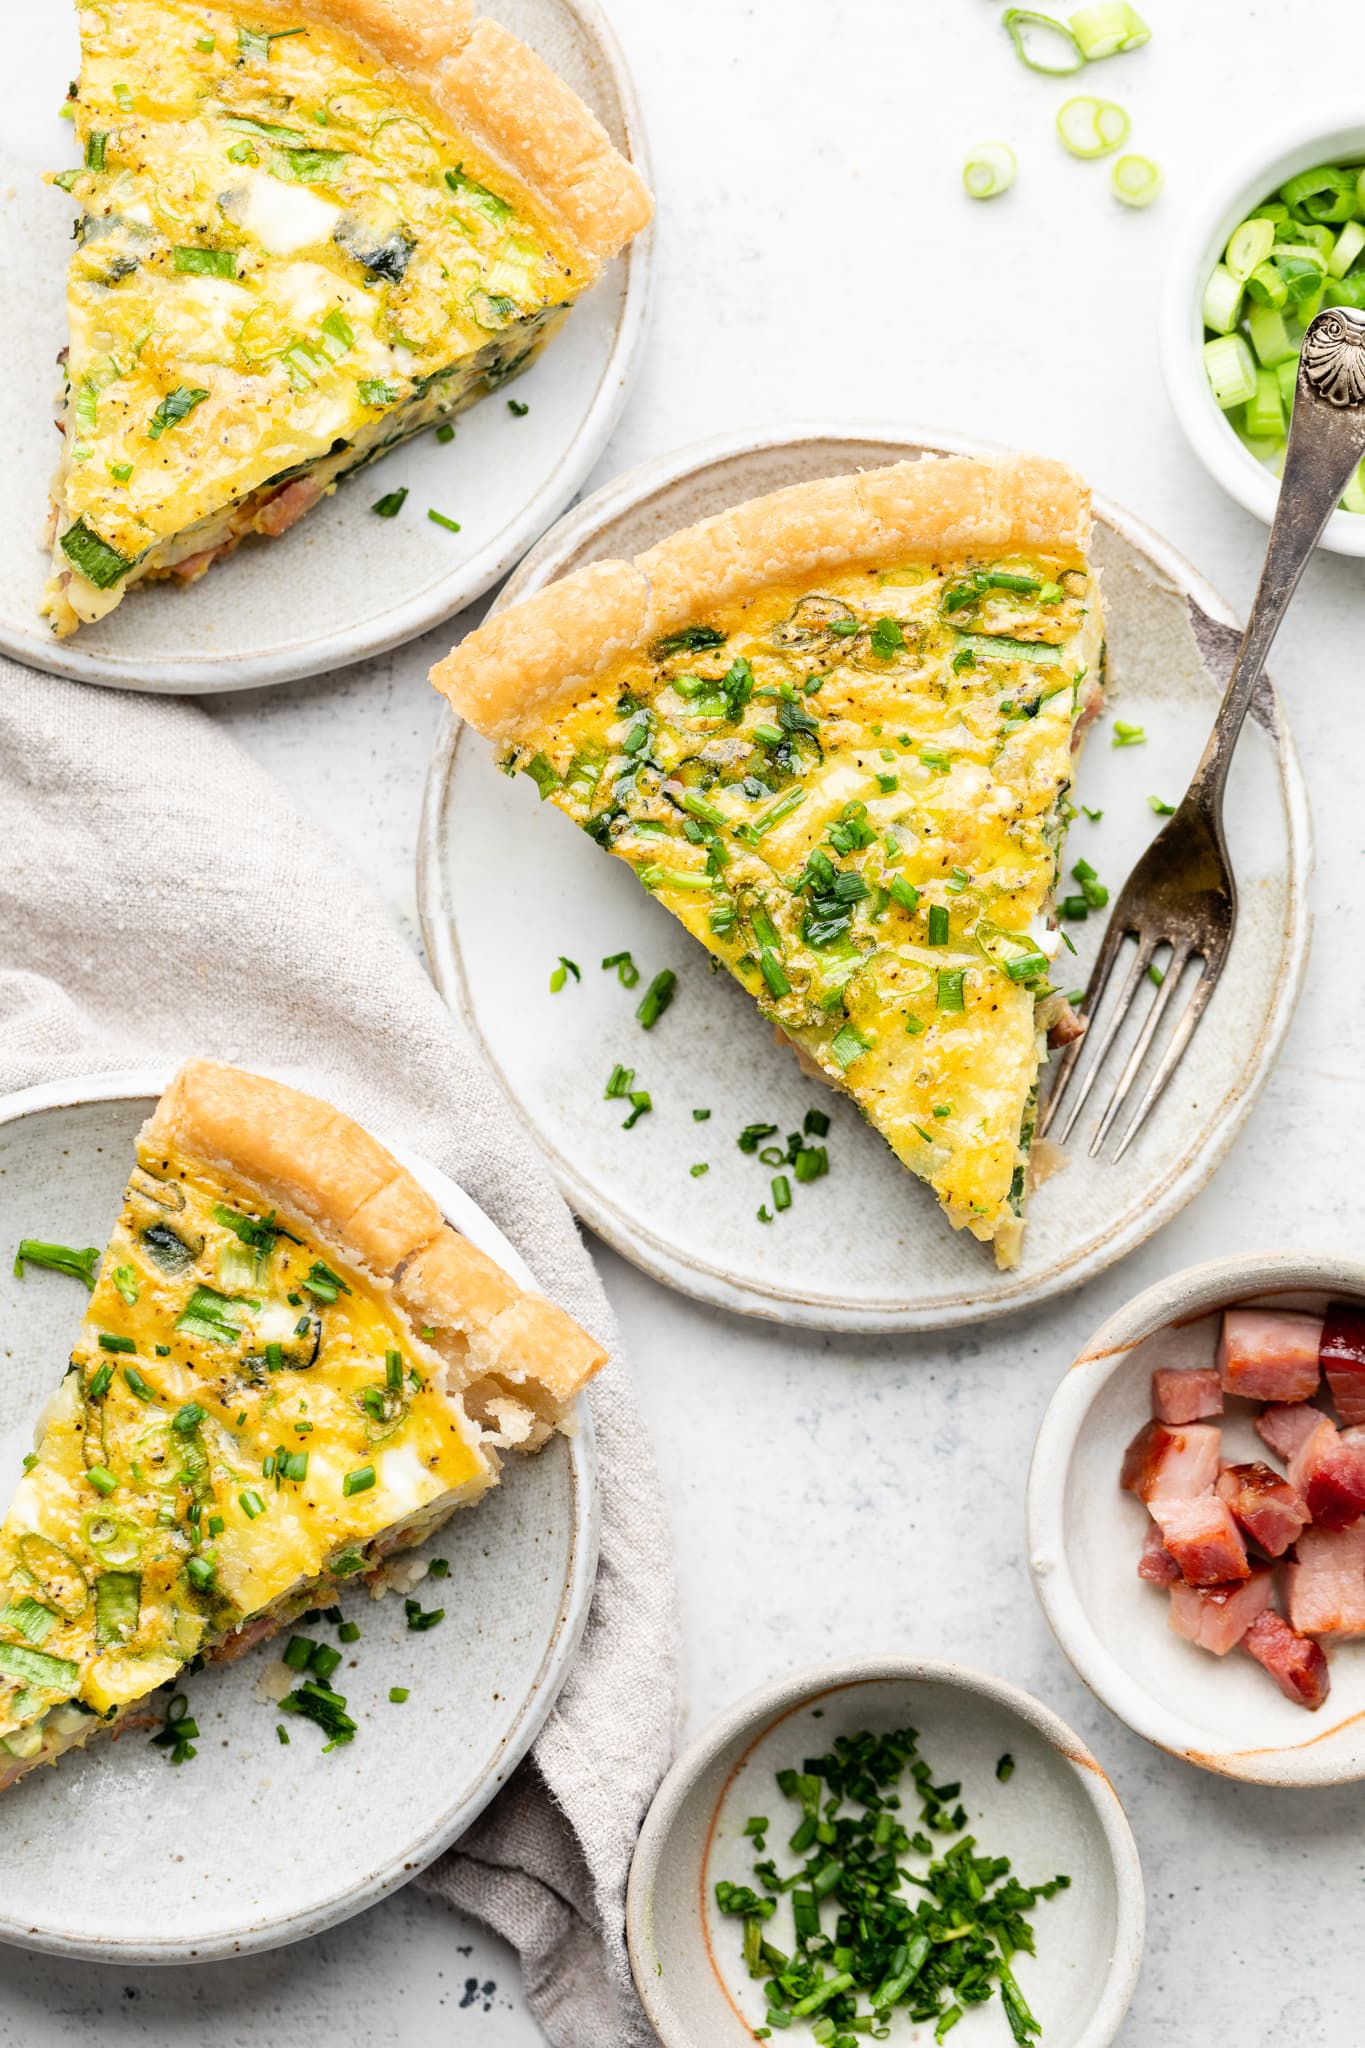 https://allthehealthythings.com/wp-content/uploads/2022/04/ham-and-spinach-quiche-8.jpg